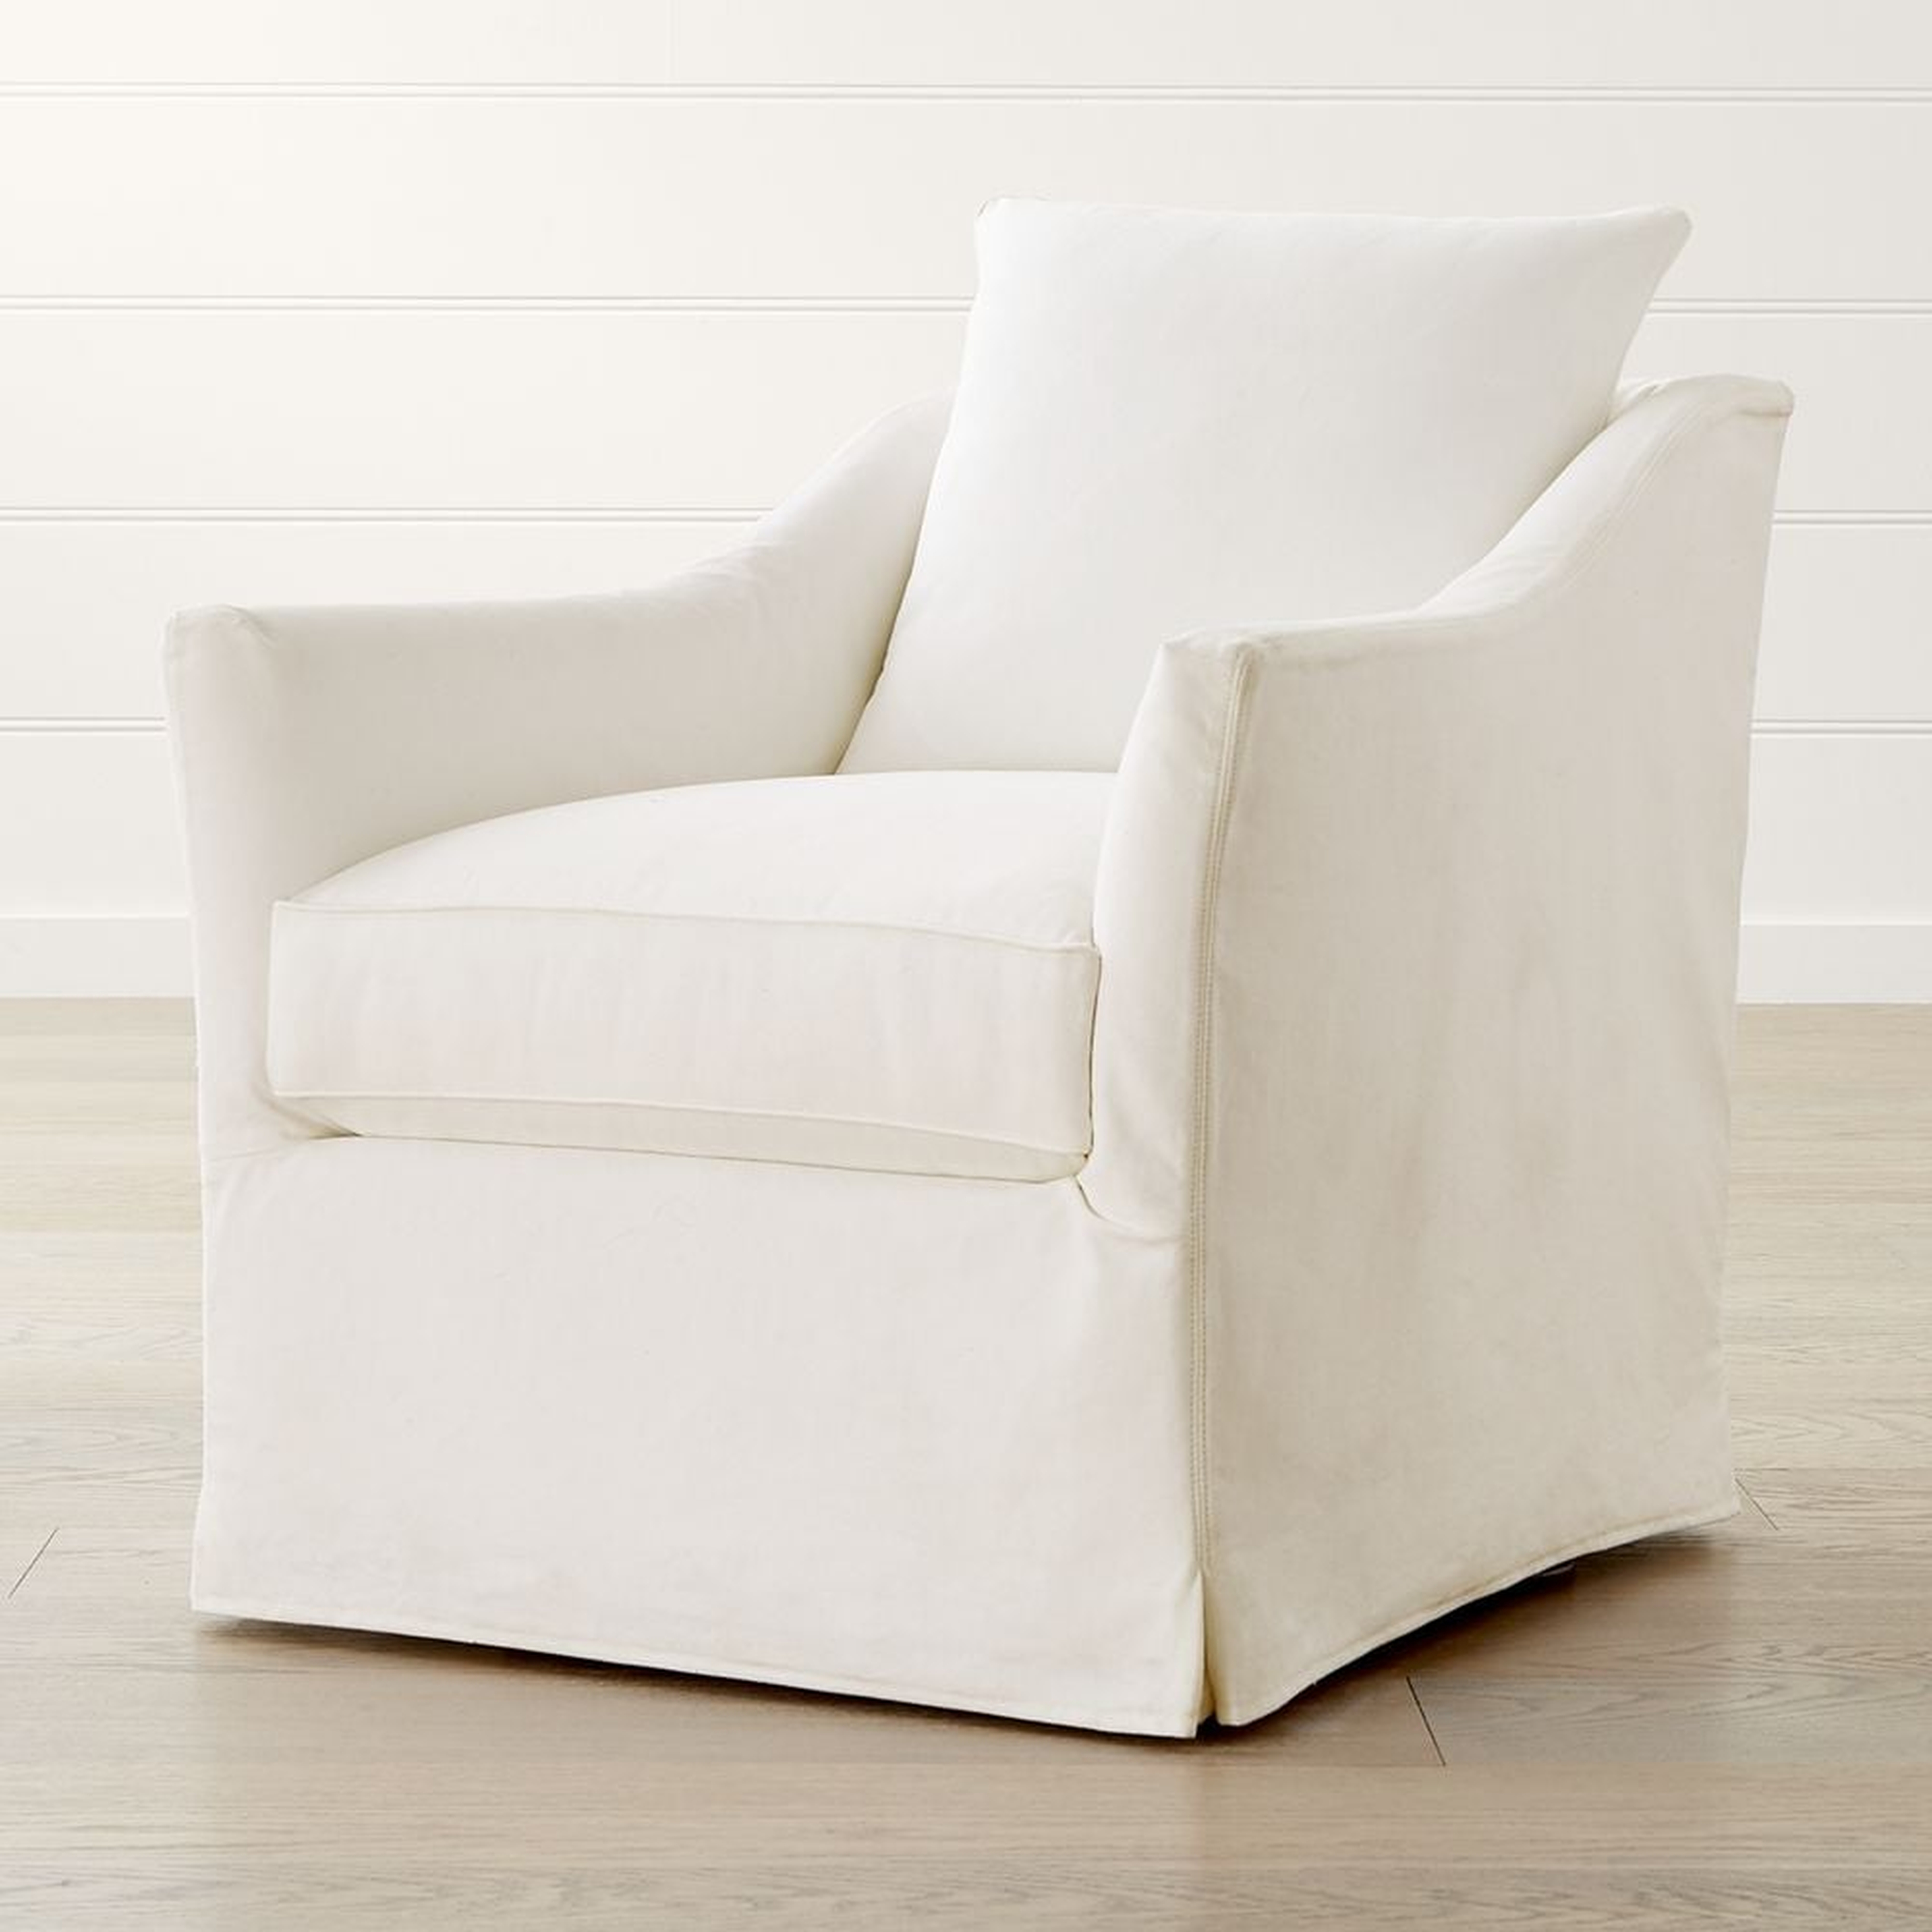 Keely Slipcovered Swivel Chair - Crate and Barrel